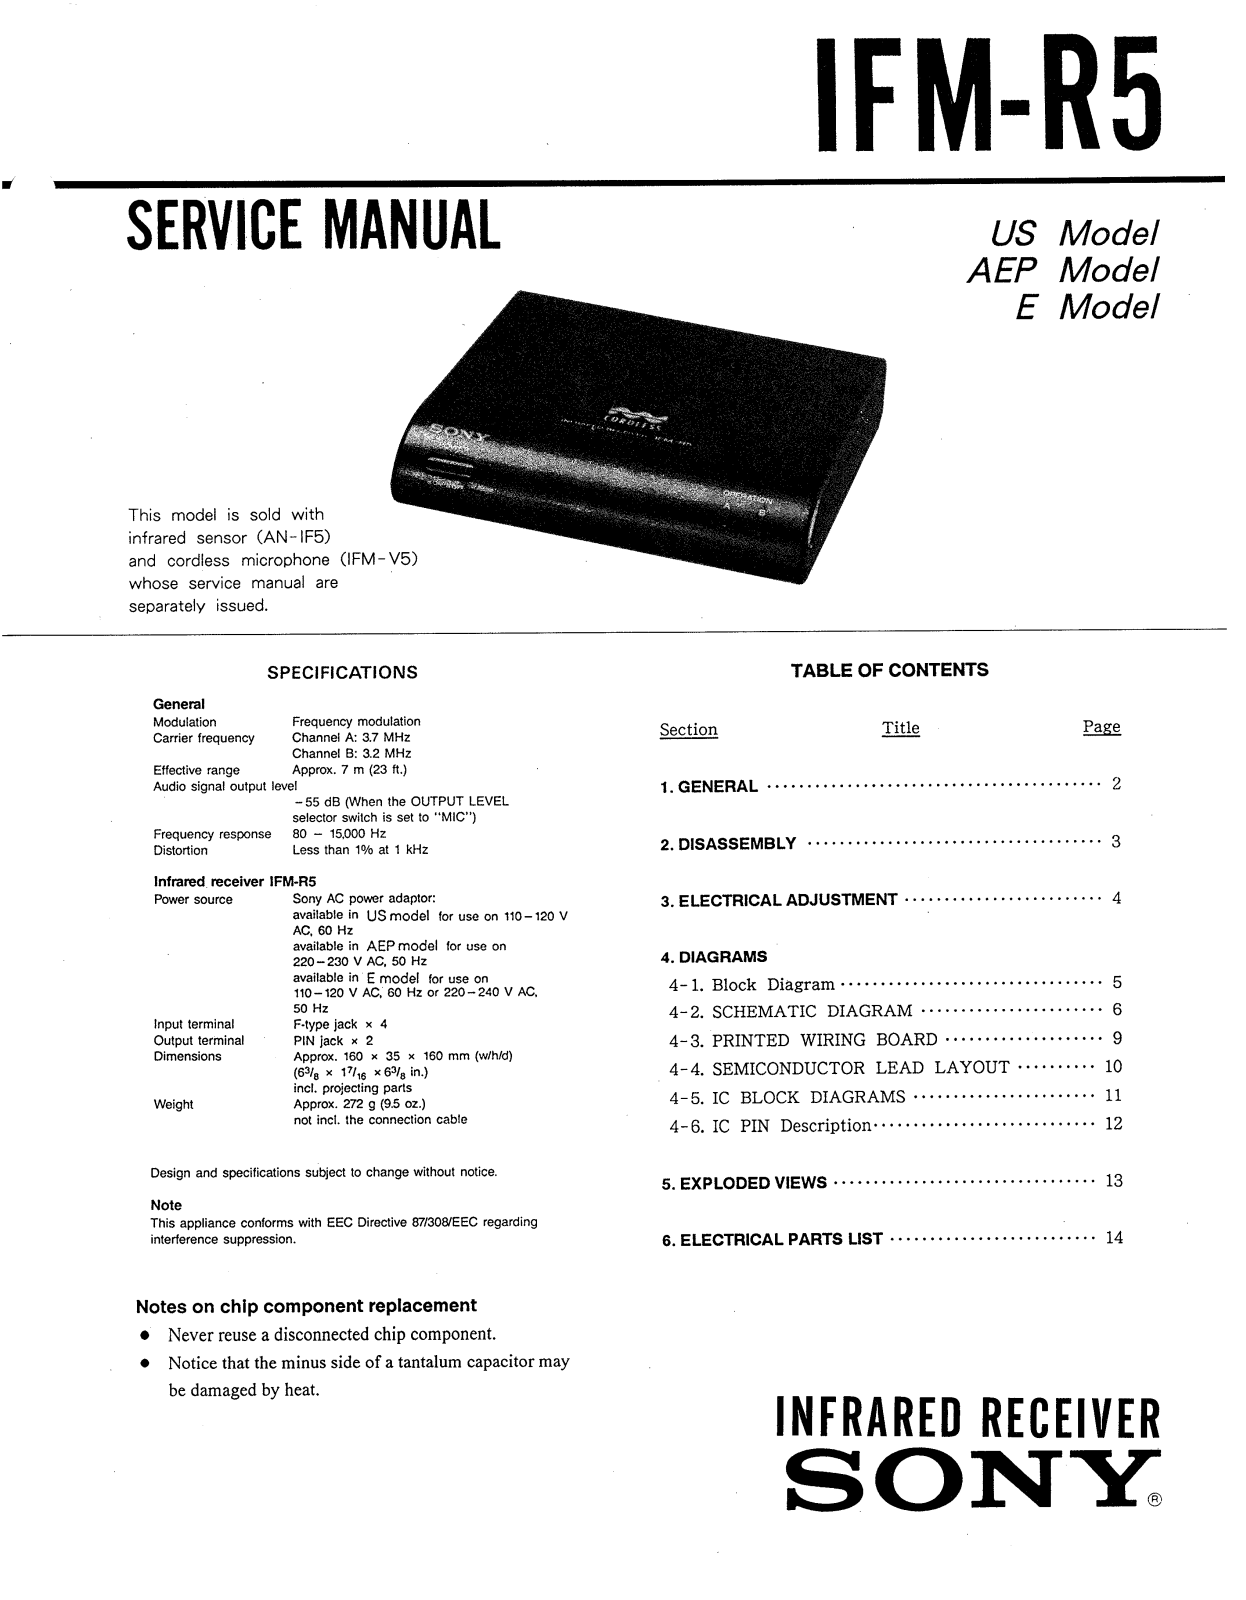 Sony IFMR-5 Service manual